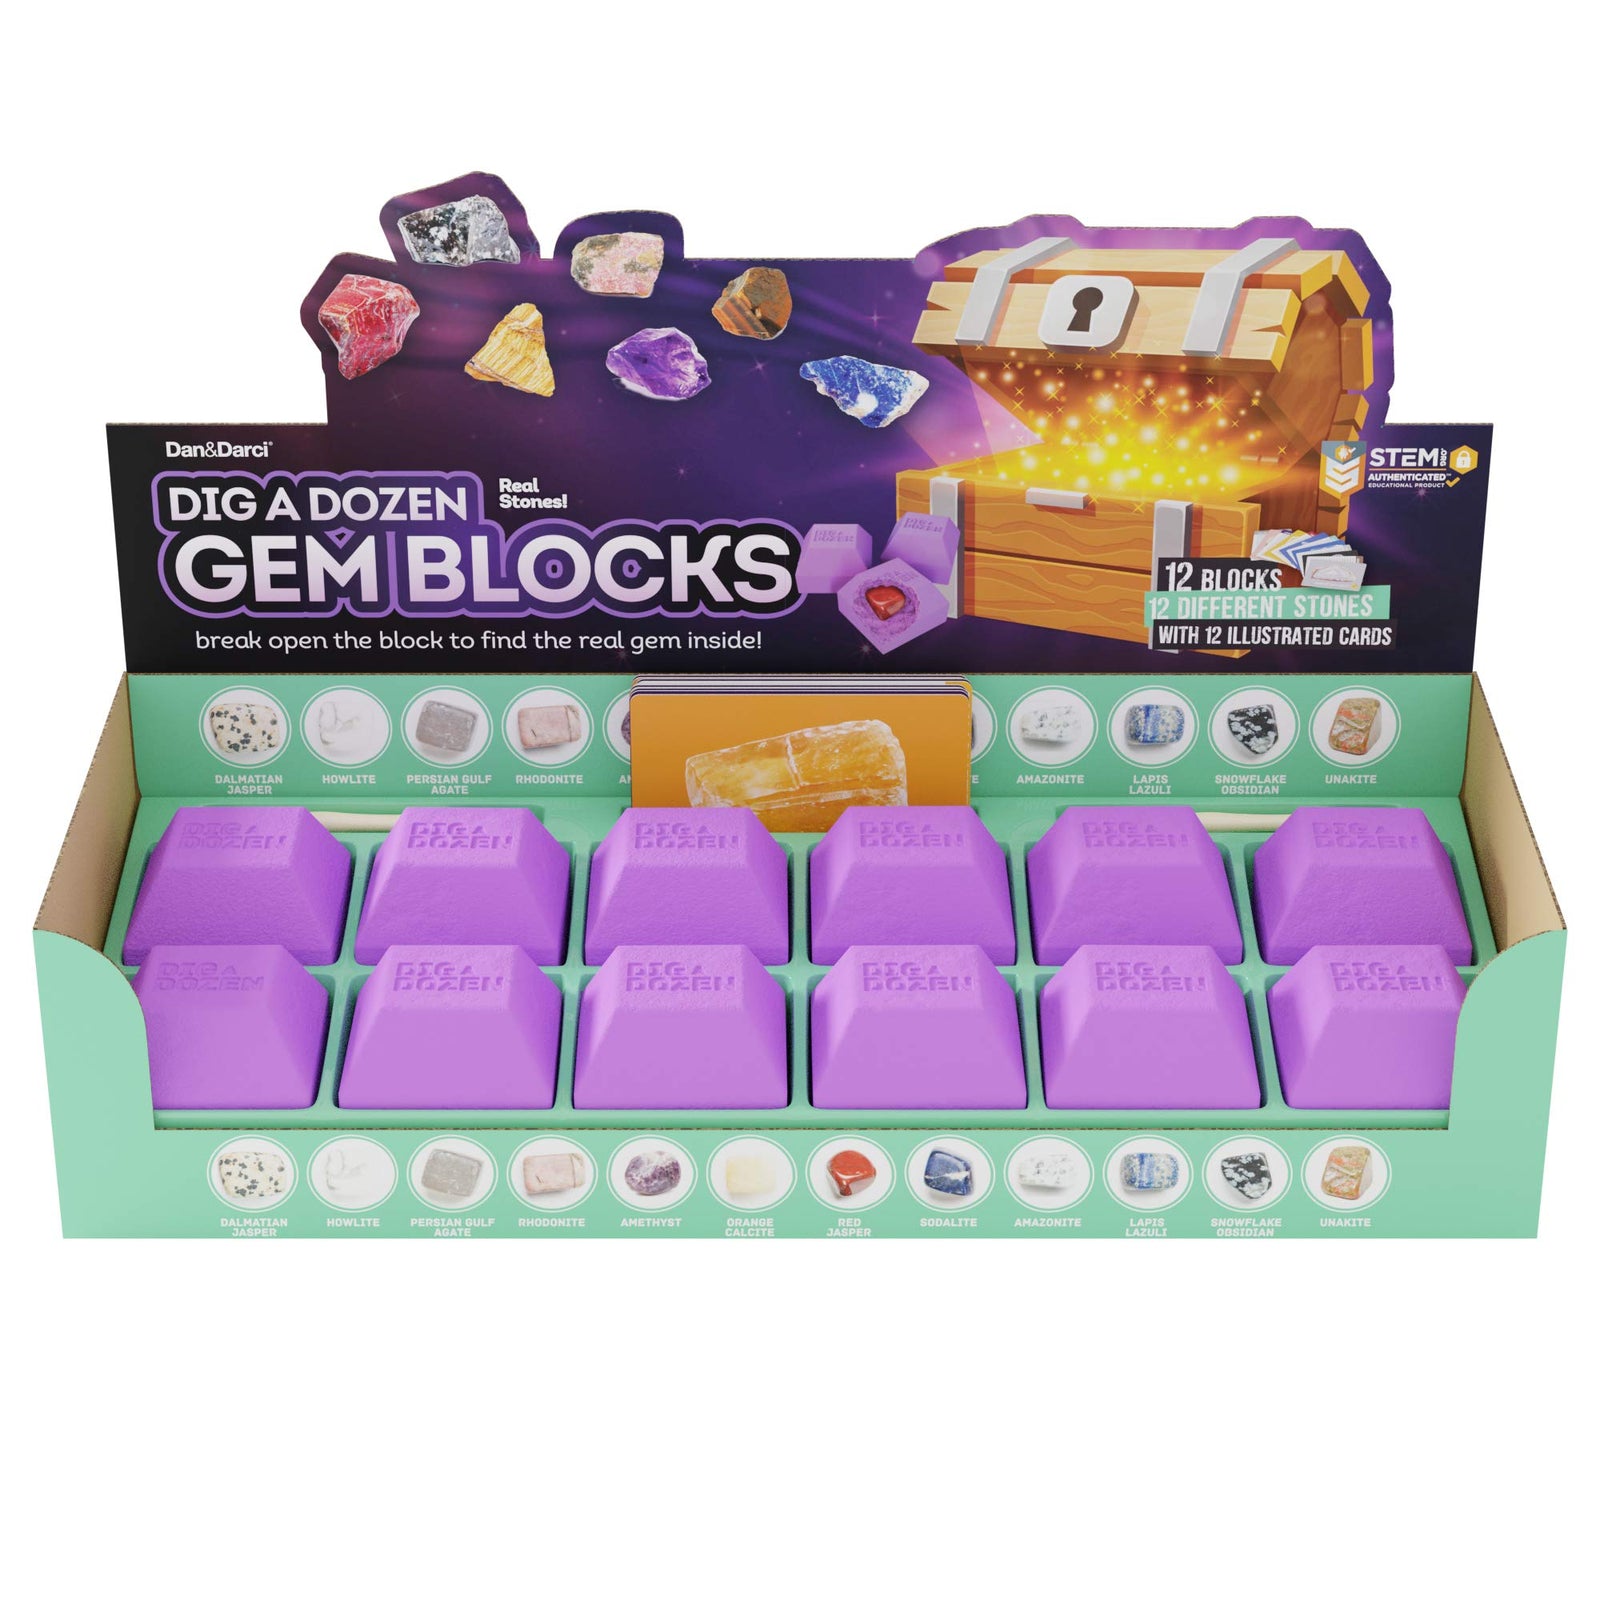 Dig a Dozen Gem Blocks - Break Open 12 Unique Gemstone Blocks and Discover 12 Real Precious Stones - Mineral & Rock Collection for Kids - Archaeology Geology Science Gift for Boys & Girls